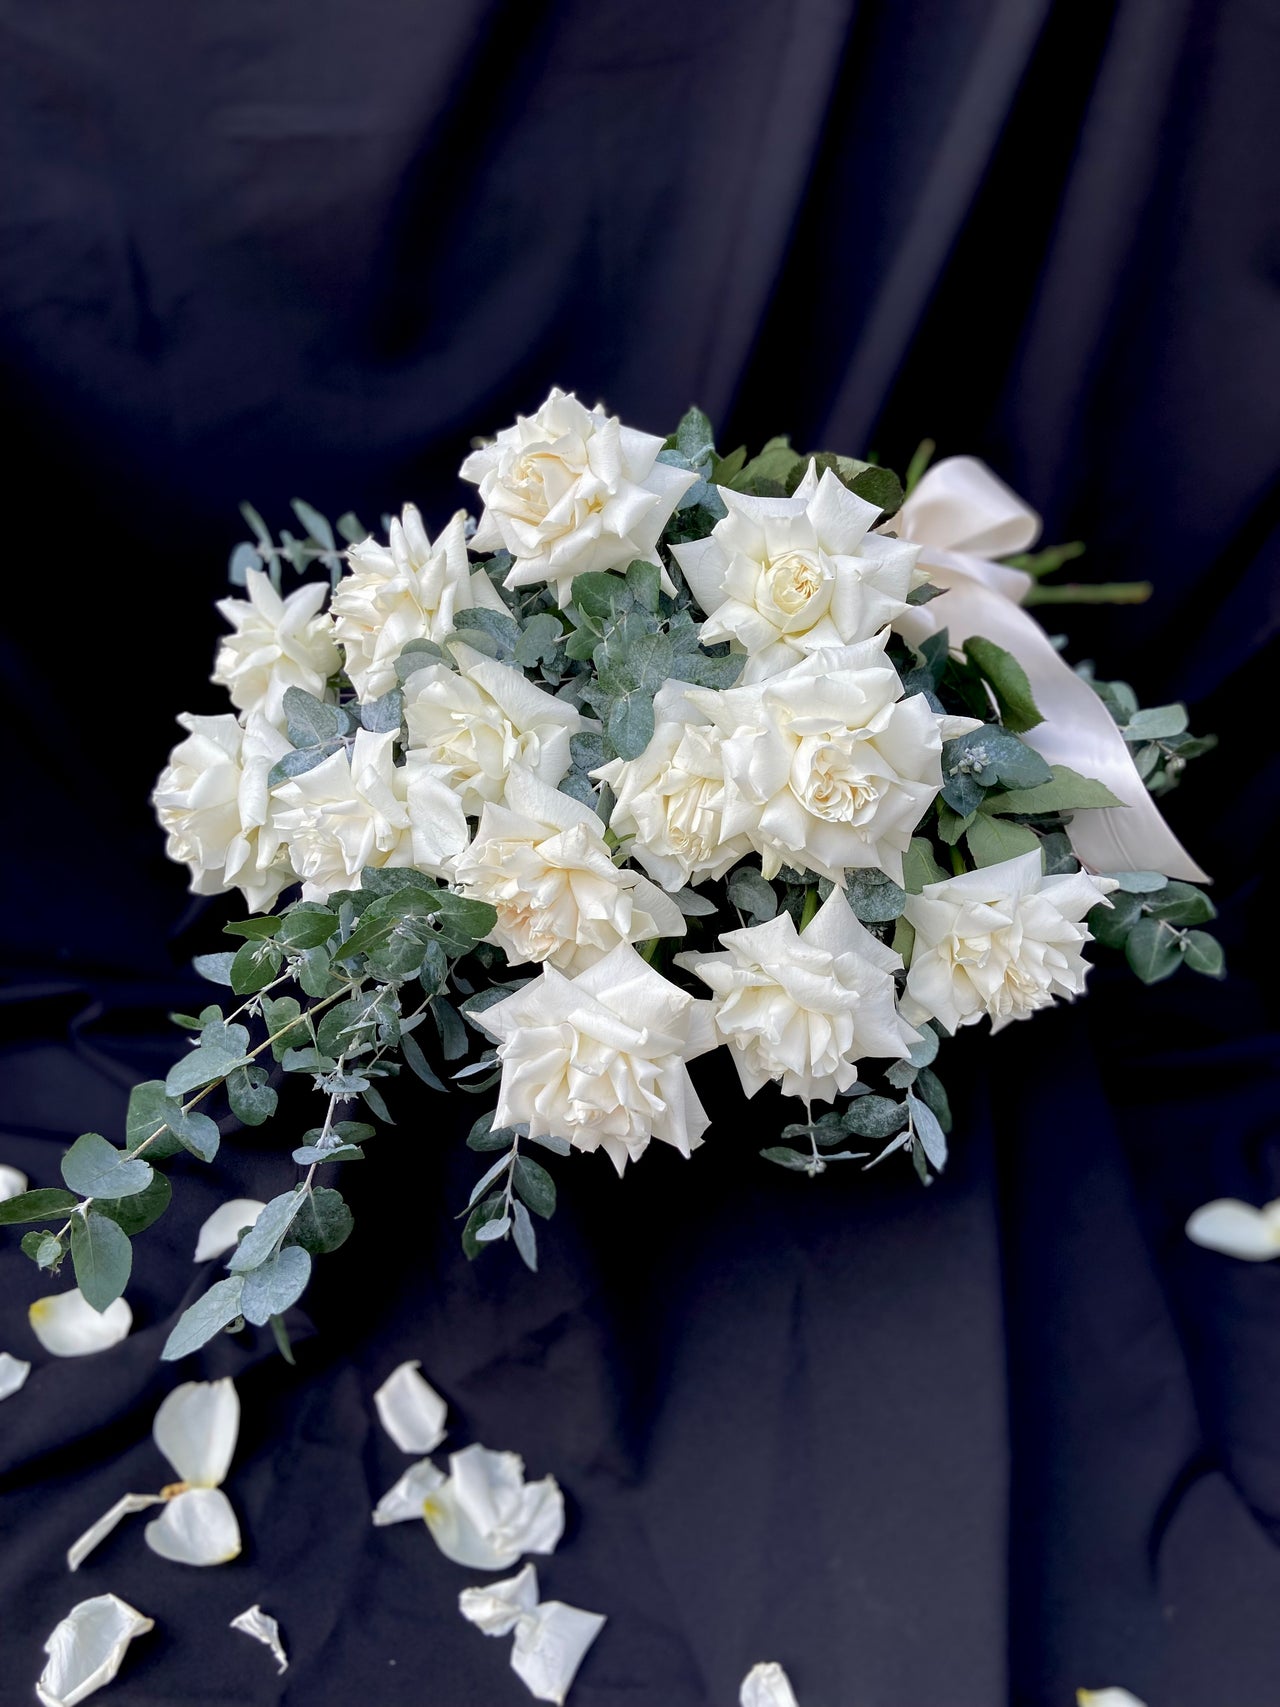 Valentine's Day Red Rose Bouquet - Long stemmed white roses - Classic Rose Bouquet - Haven Botanical